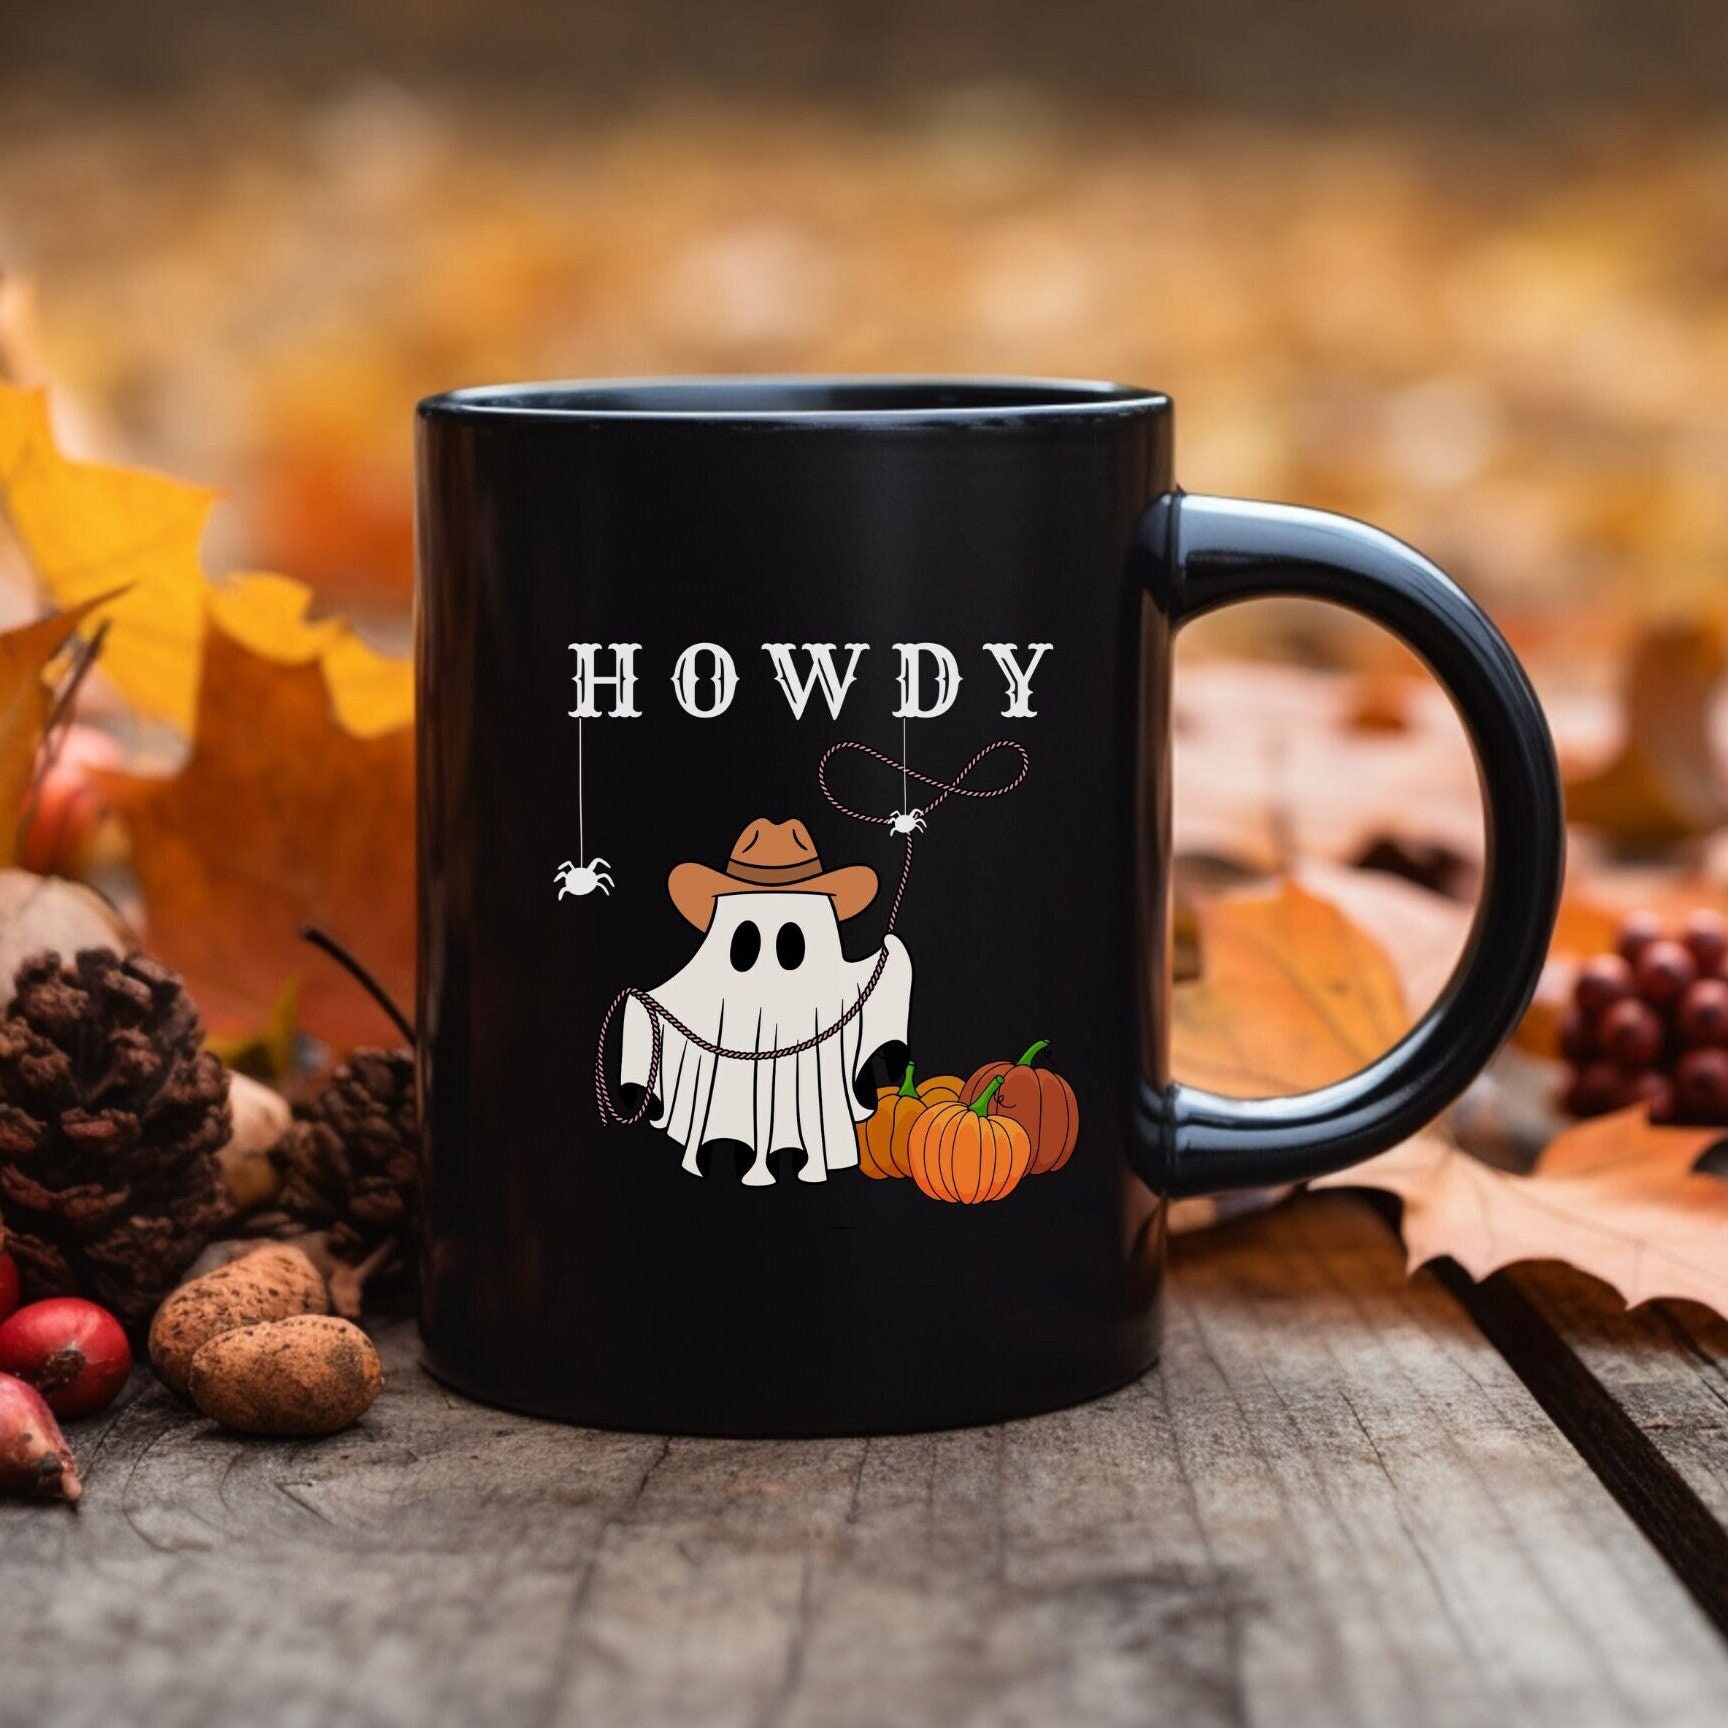 Howdy Star Happy Face Ice Coffee Cup - cutandcropped